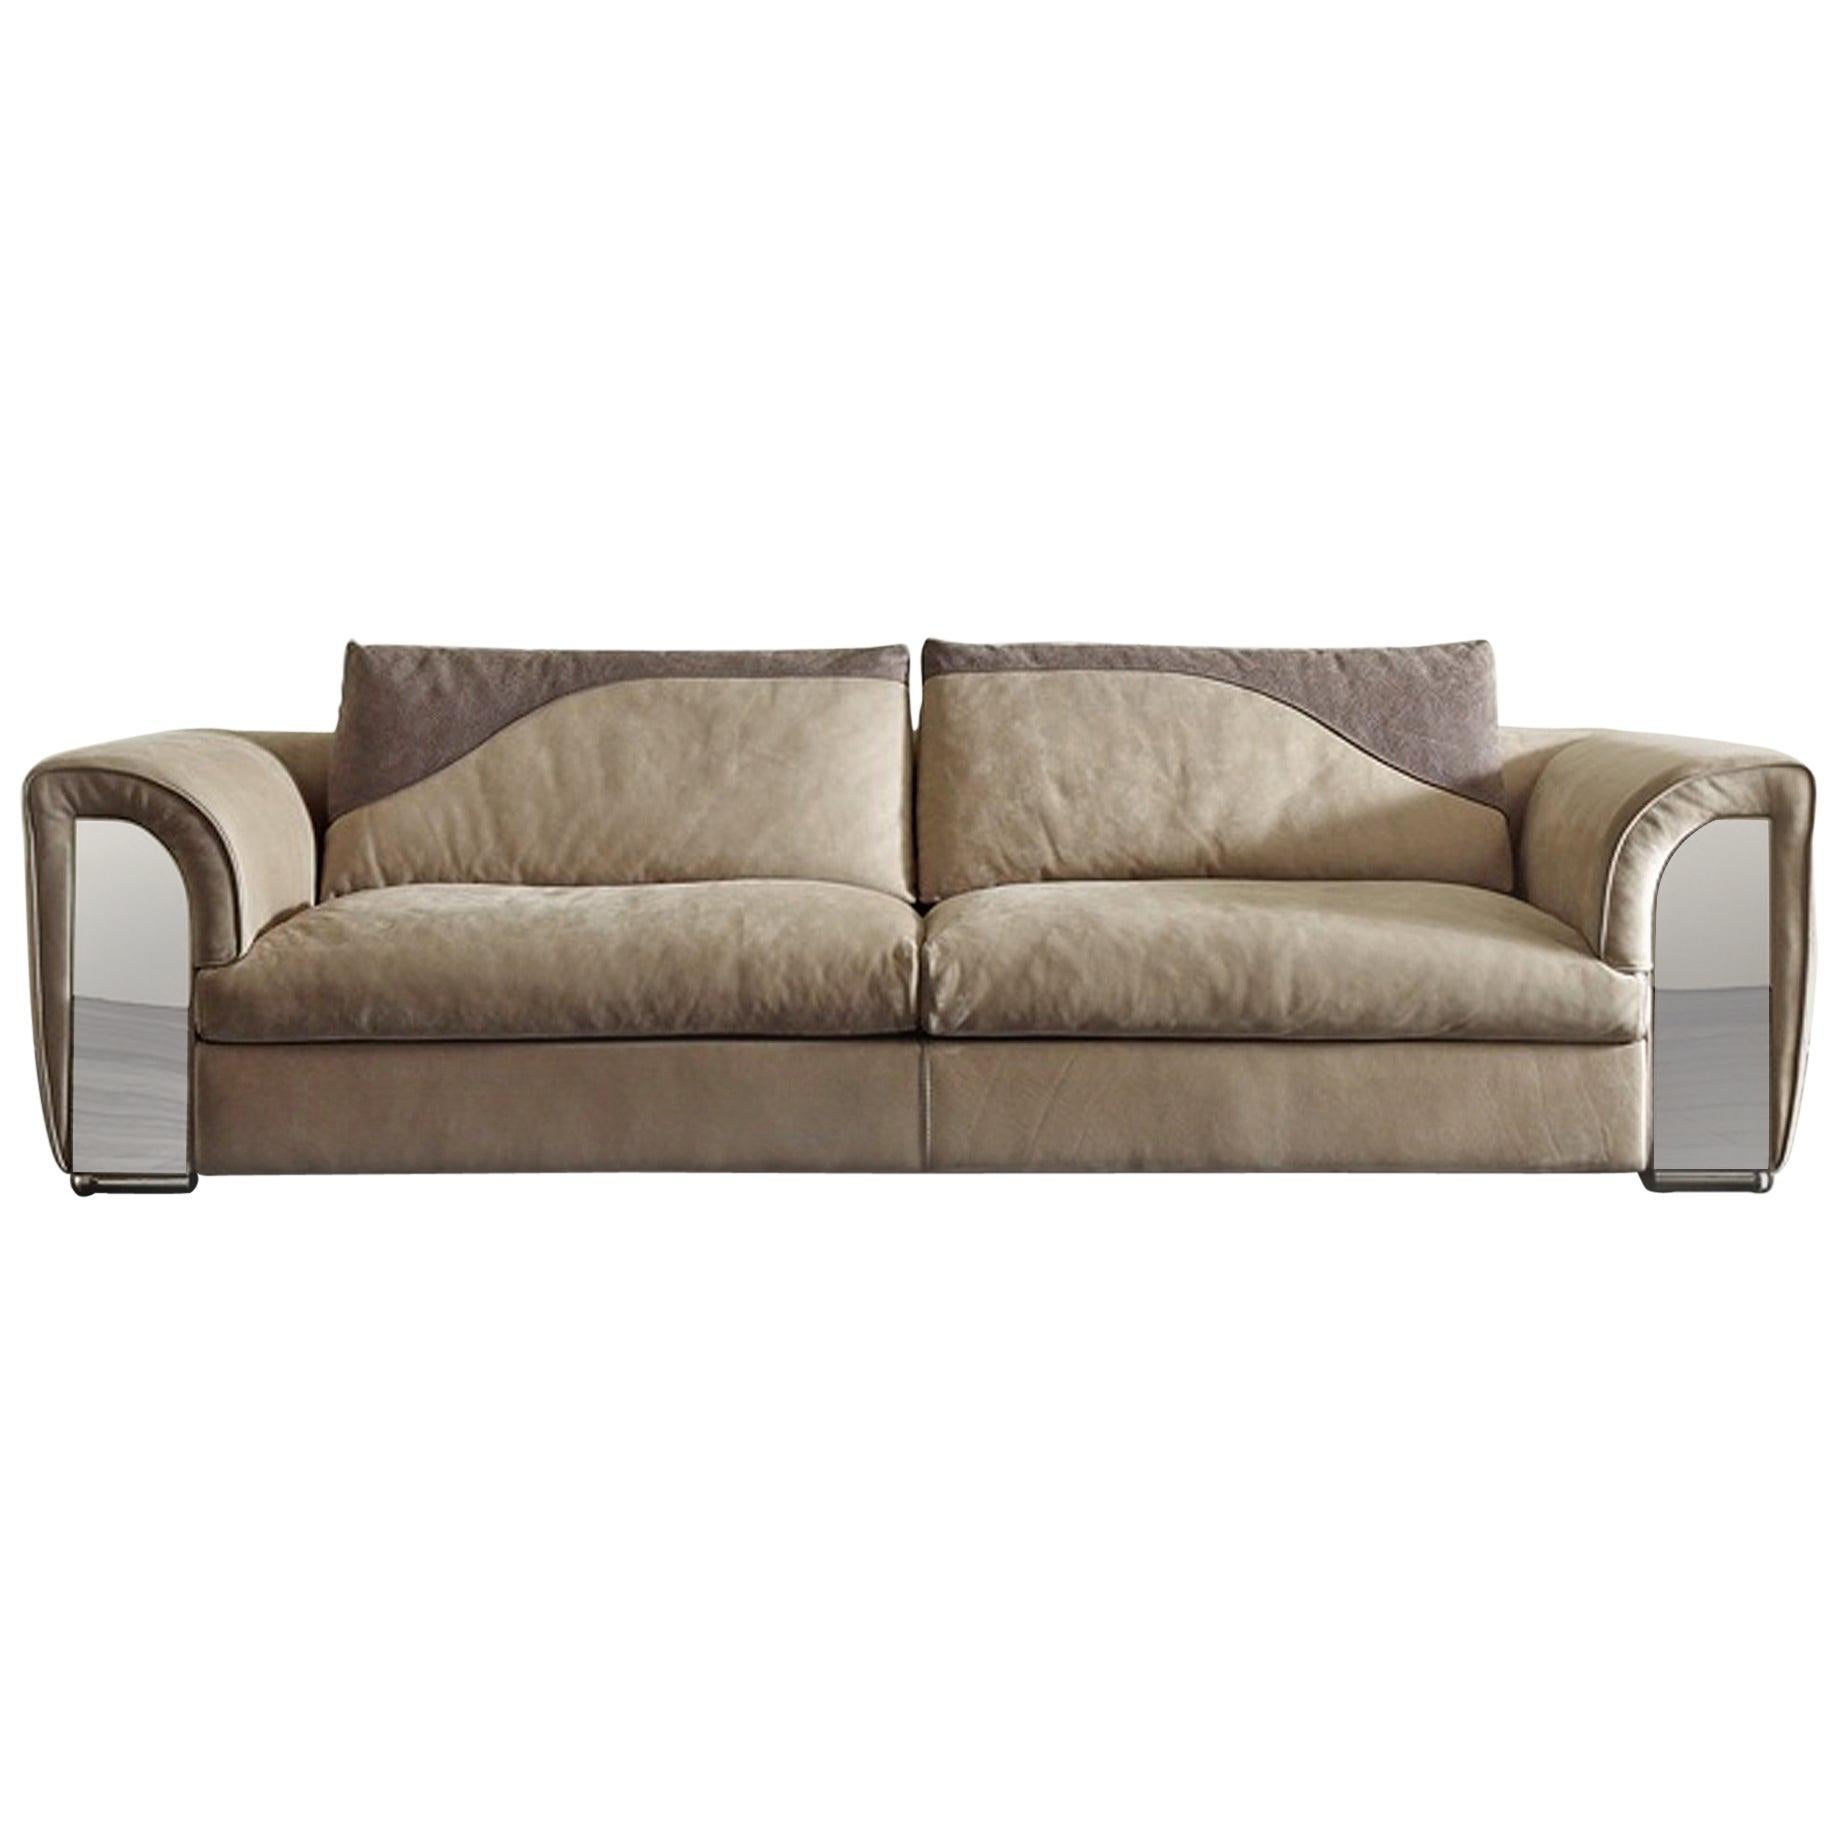 Atlanta Sofa with Leather and Shiny Steel Details For Sale